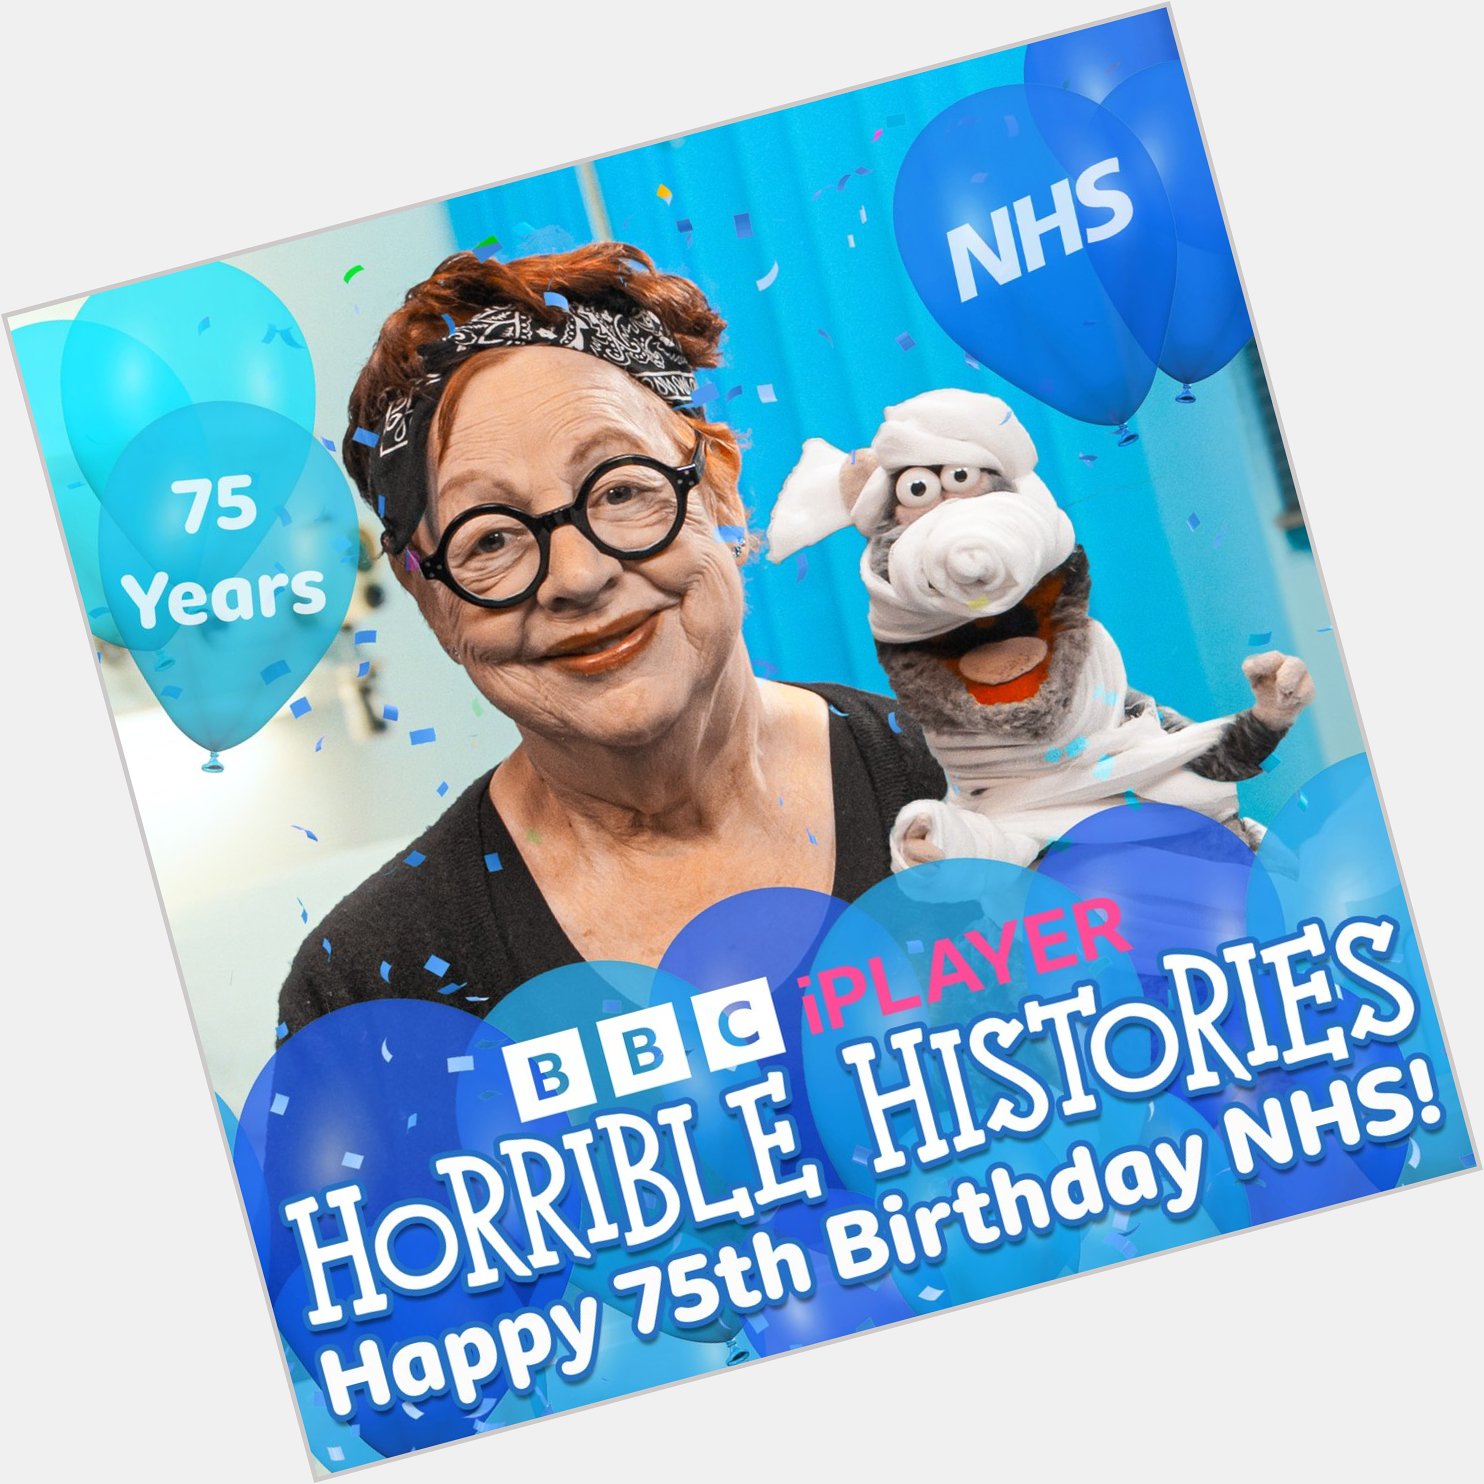 Happy 75th Birthday NHS! Catch our Jo Brand in a Horrible Histories special tonight at 6.30pm... 